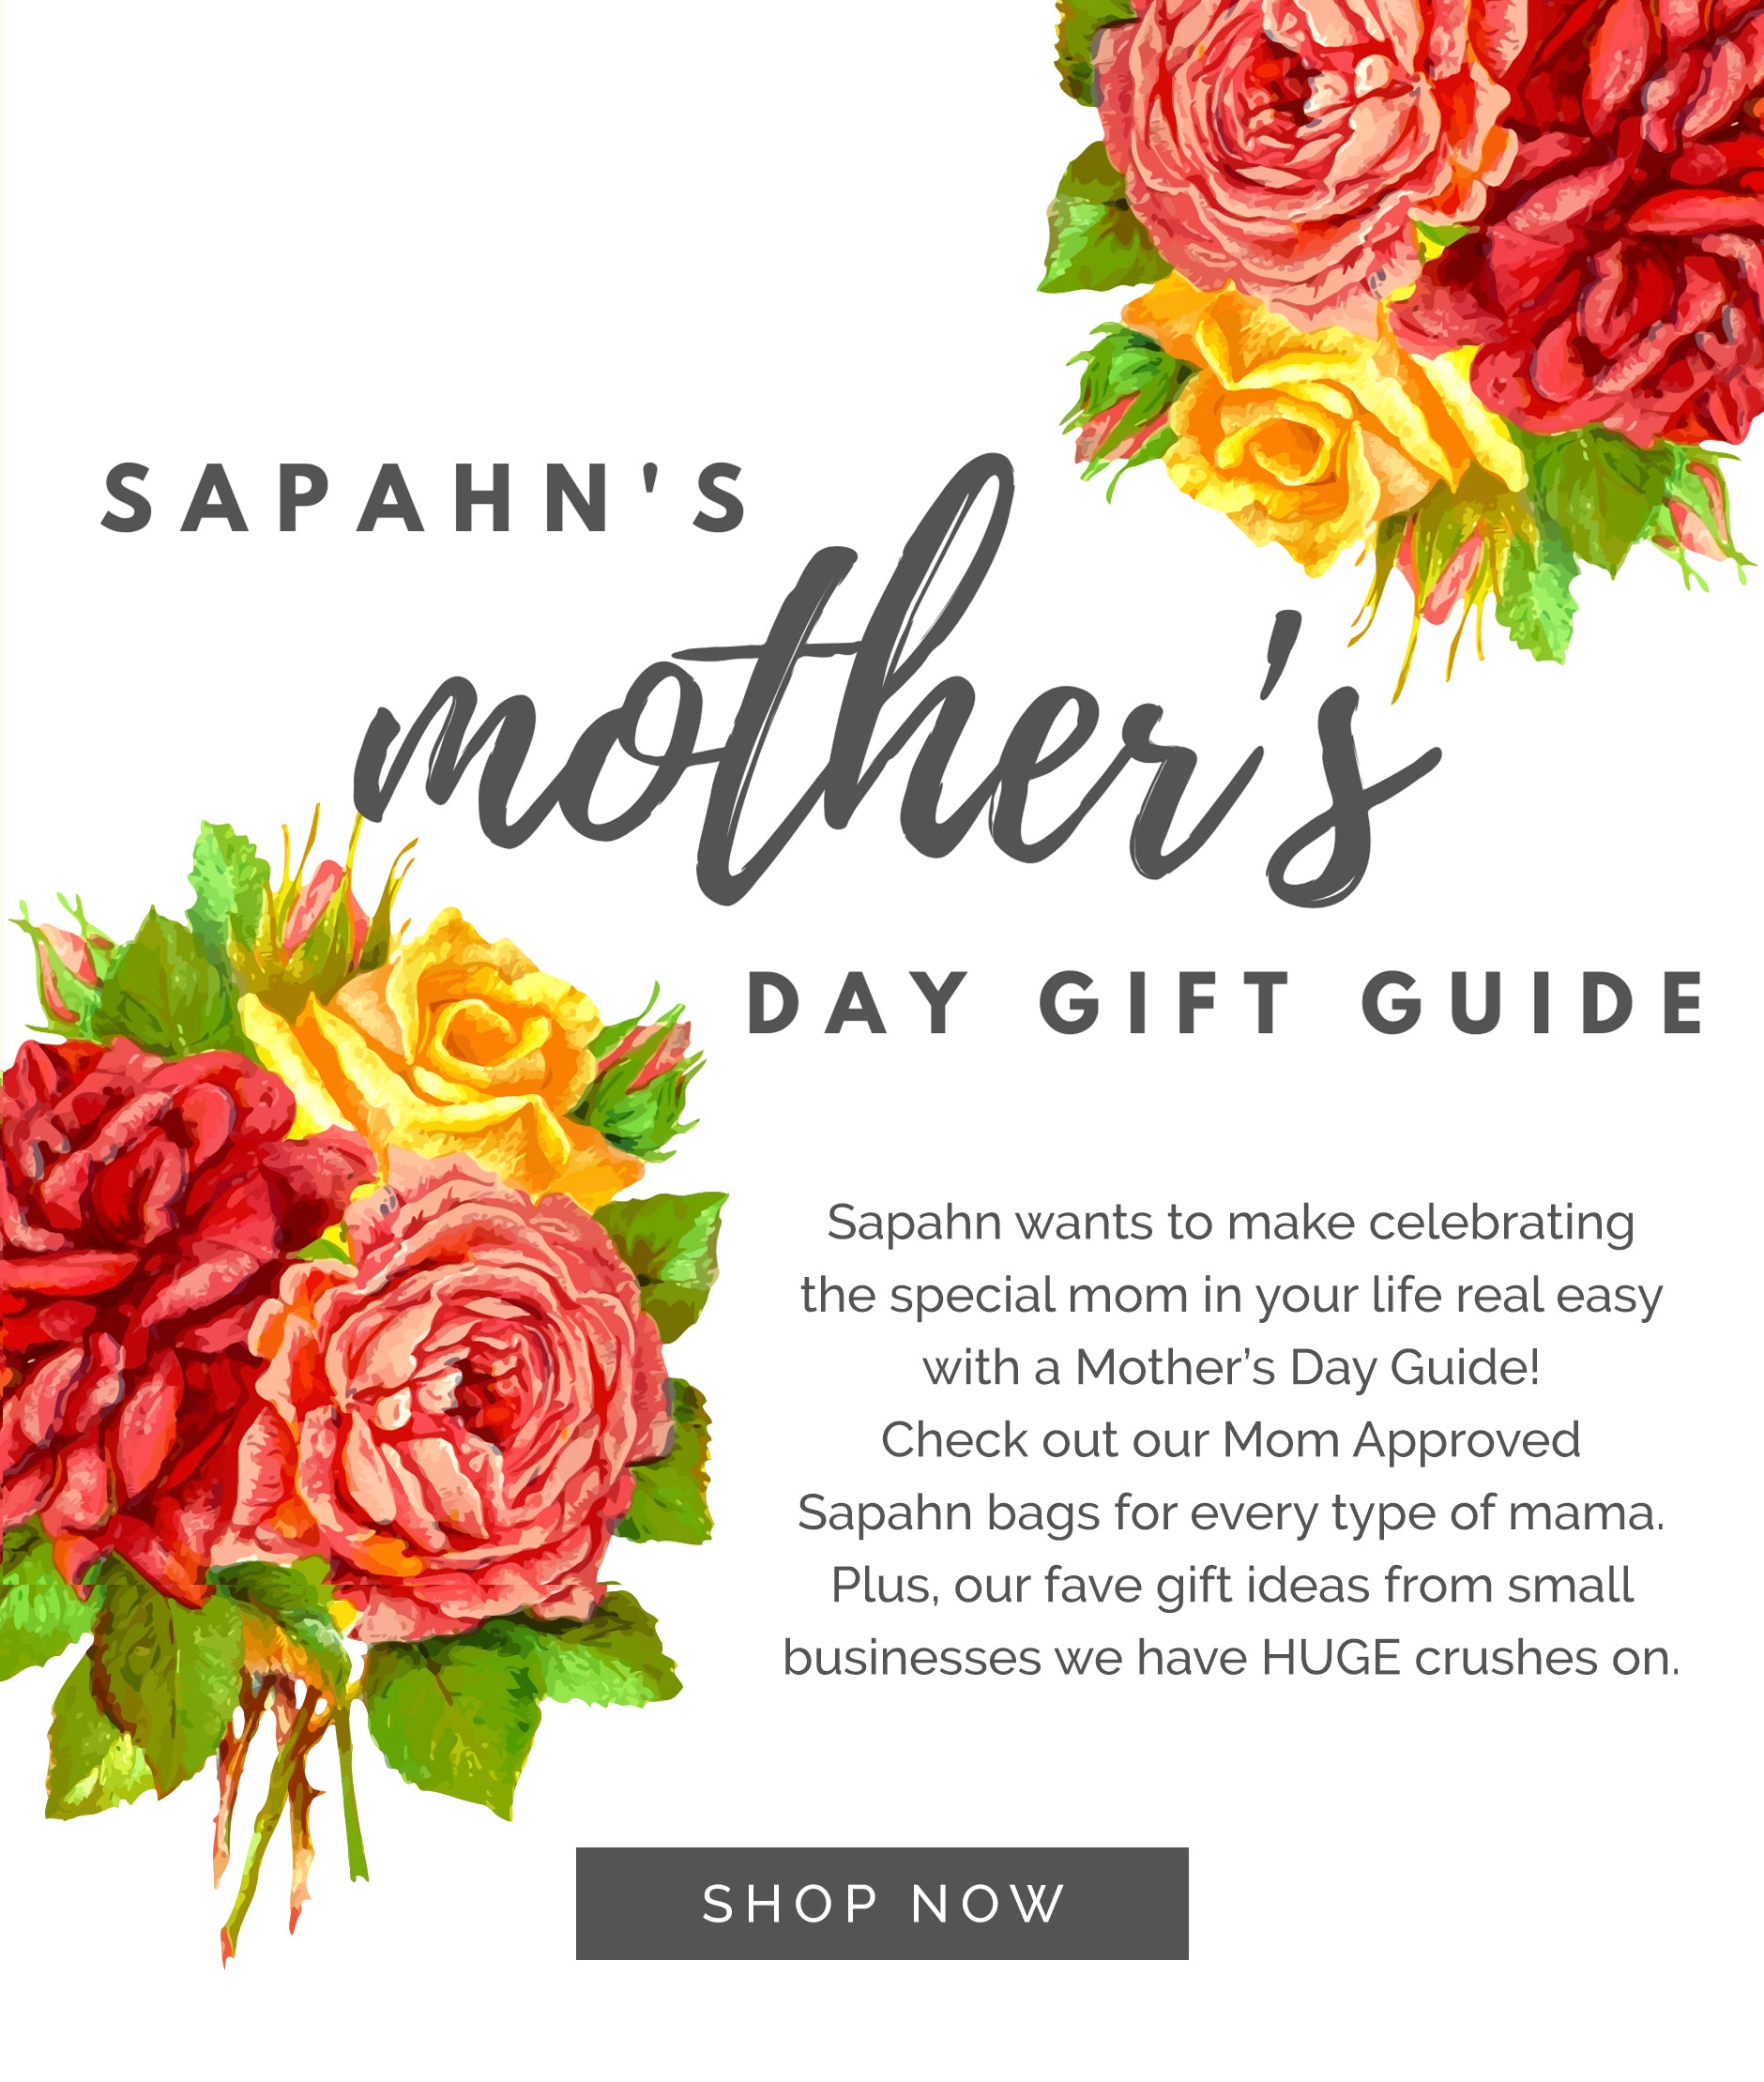 Sapahn's Mother's Day Gifting Guide